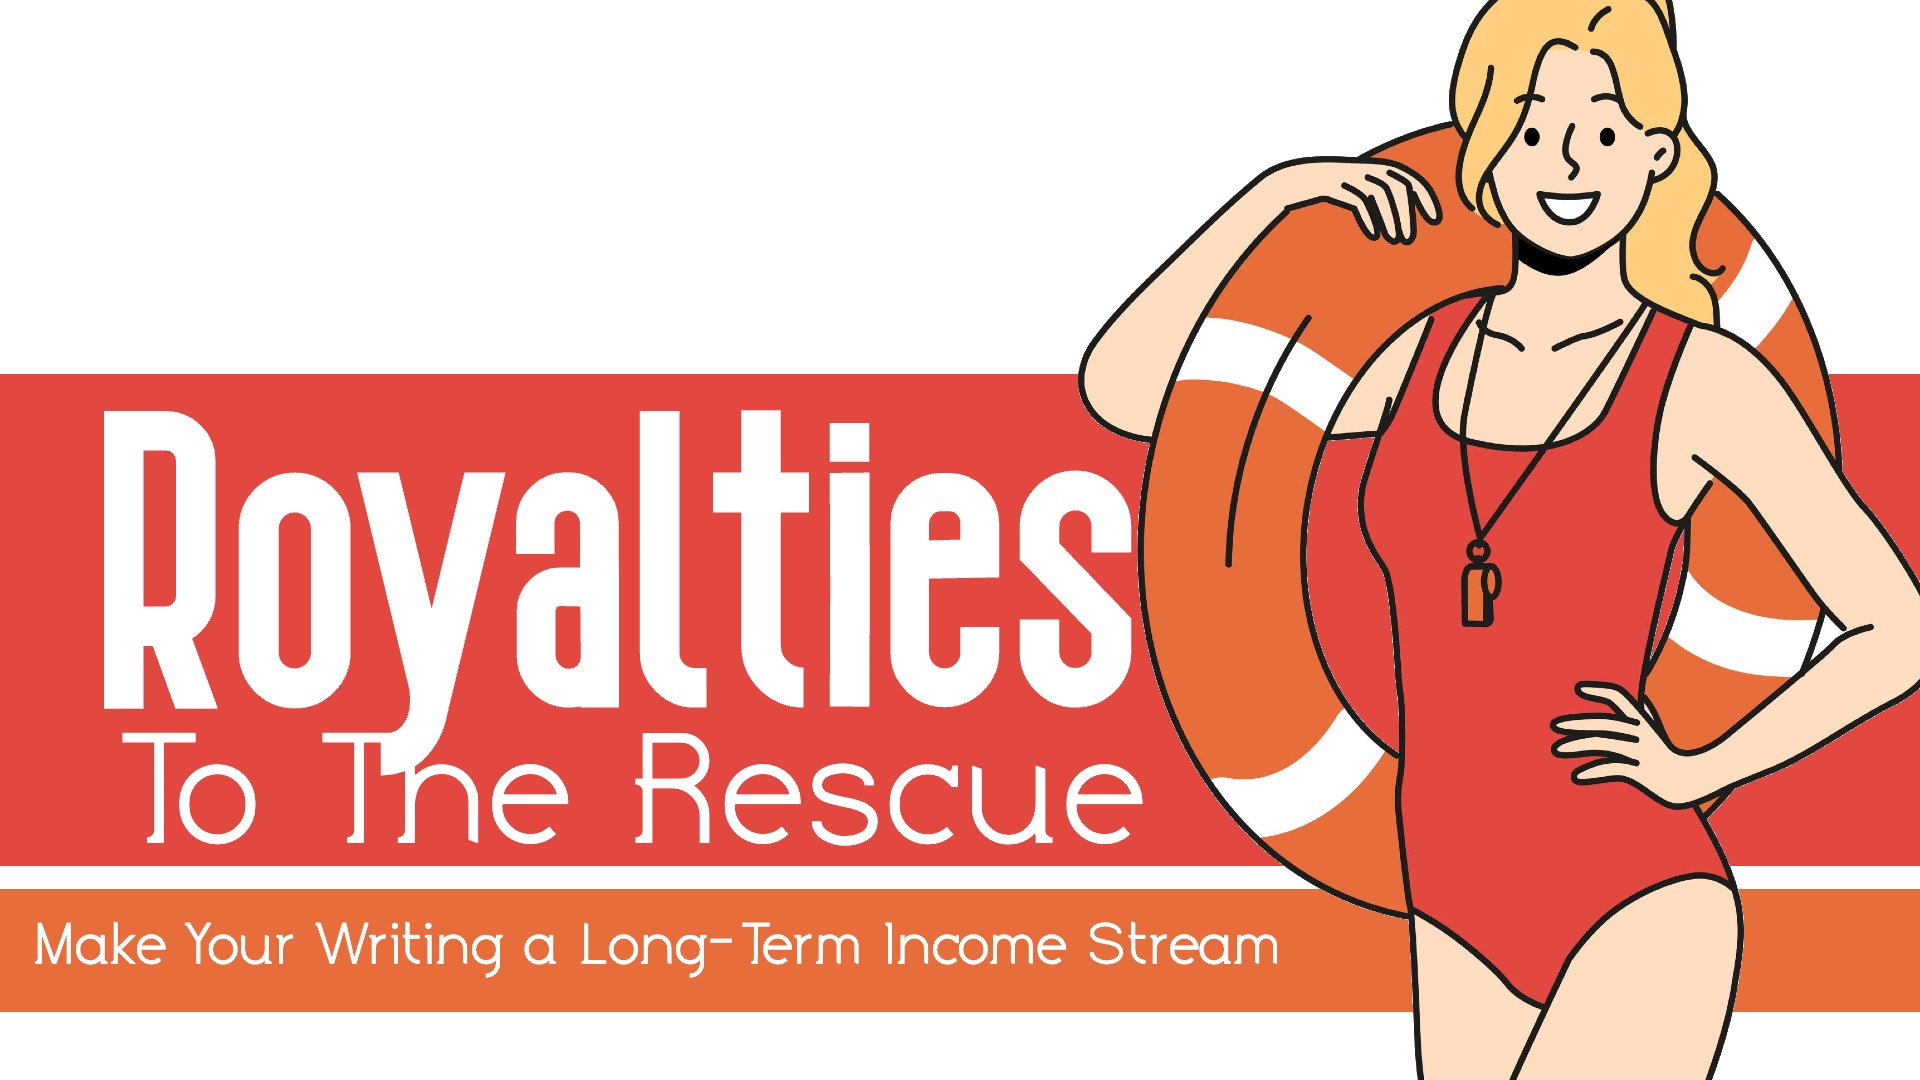 Royalties to the Rescue: Make Your Writing a Long-Term Income Stream